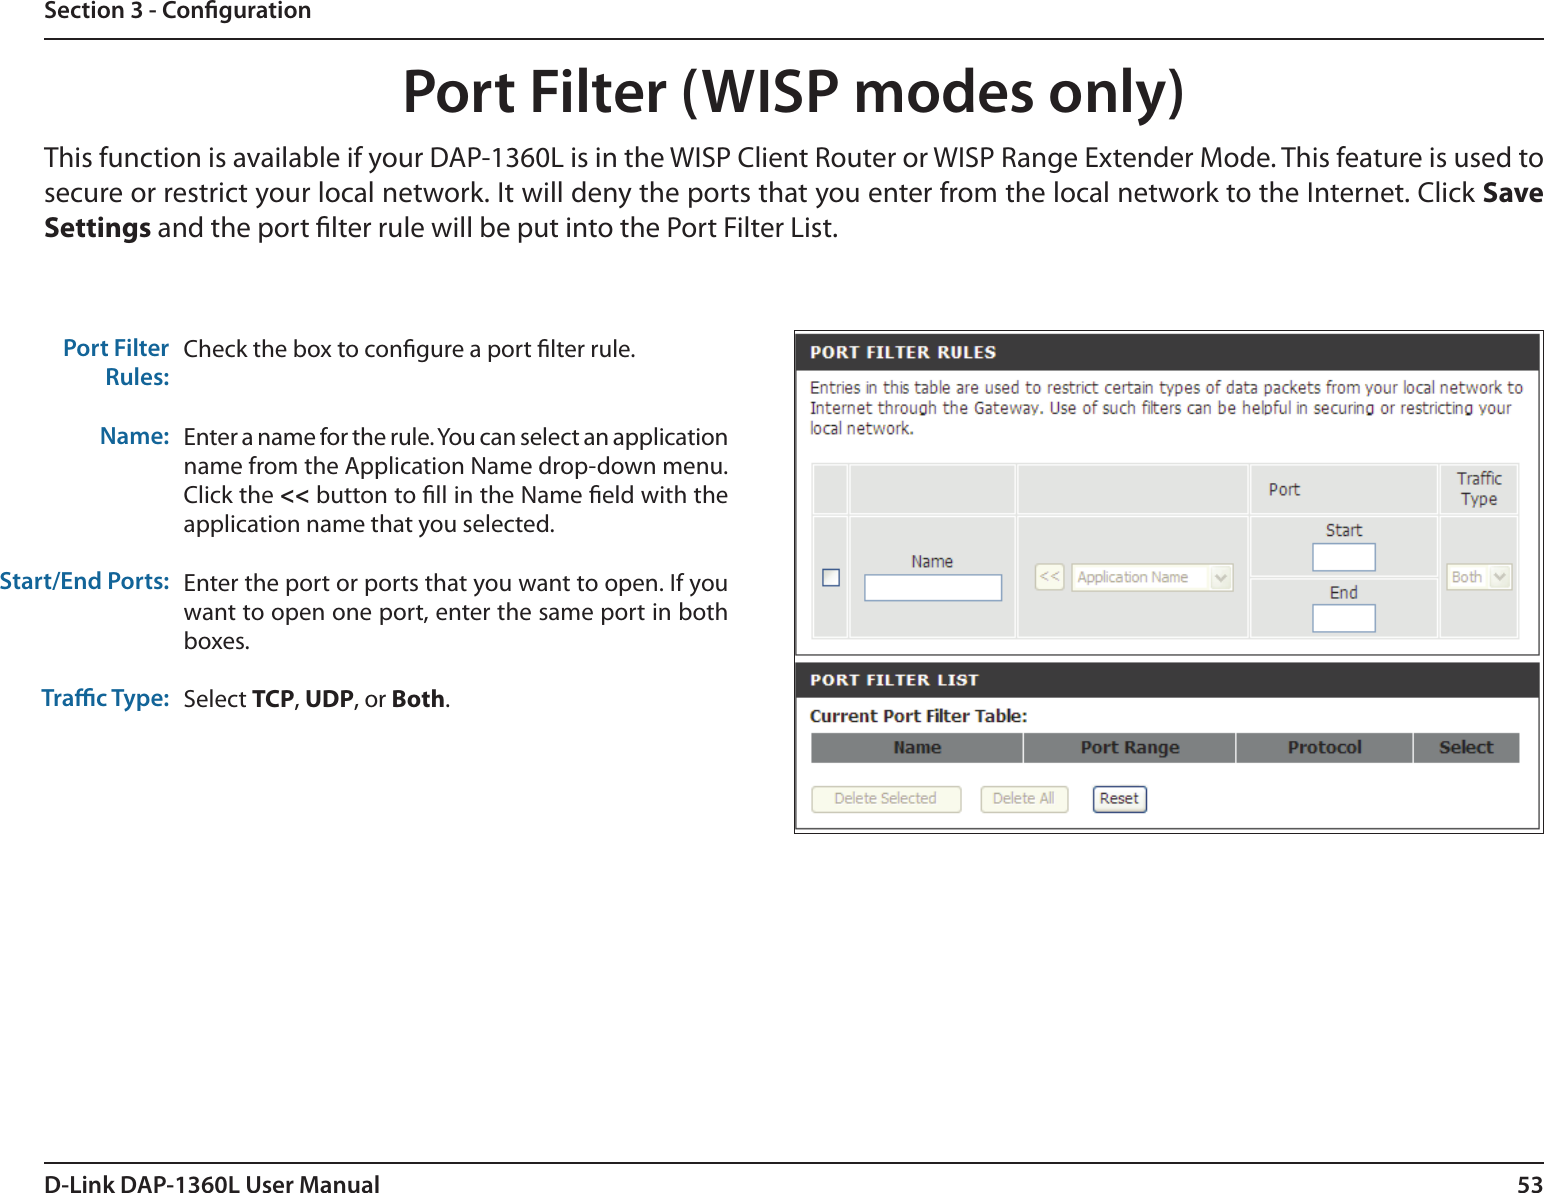 53D-Link DAP-1360L User ManualSection 3 - CongurationPort Filter (WISP modes only)Check the box to congure a port lter rule.Enter a name for the rule. You can select an application name from the Application Name drop-down menu. Click the &lt;&lt; button to ll in the Name eld with the application name that you selected.Enter the port or ports that you want to open. If you want to open one port, enter the same port in both boxes.  Select TCP, UDP, or Both.Port FilterRules:Name:Start/End Ports:Trac Type:This function is available if your DAP-1360L is in the WISP Client Router or WISP Range Extender Mode. This feature is used to secure or restrict your local network. It will deny the ports that you enter from the local network to the Internet. Click Save Settings and the port lter rule will be put into the Port Filter List.